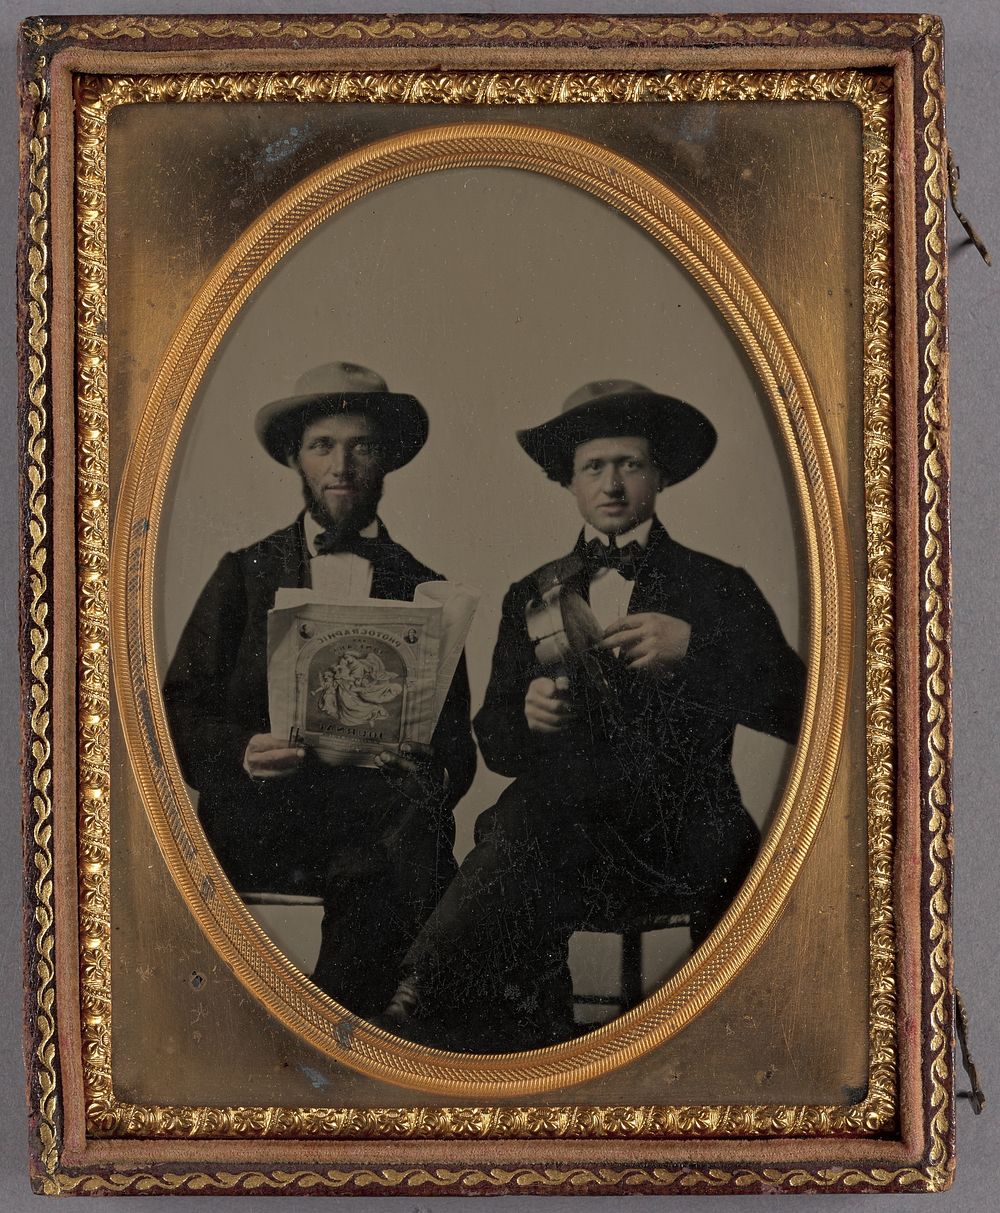 Portrait of two seated men wearing bow ties and hats